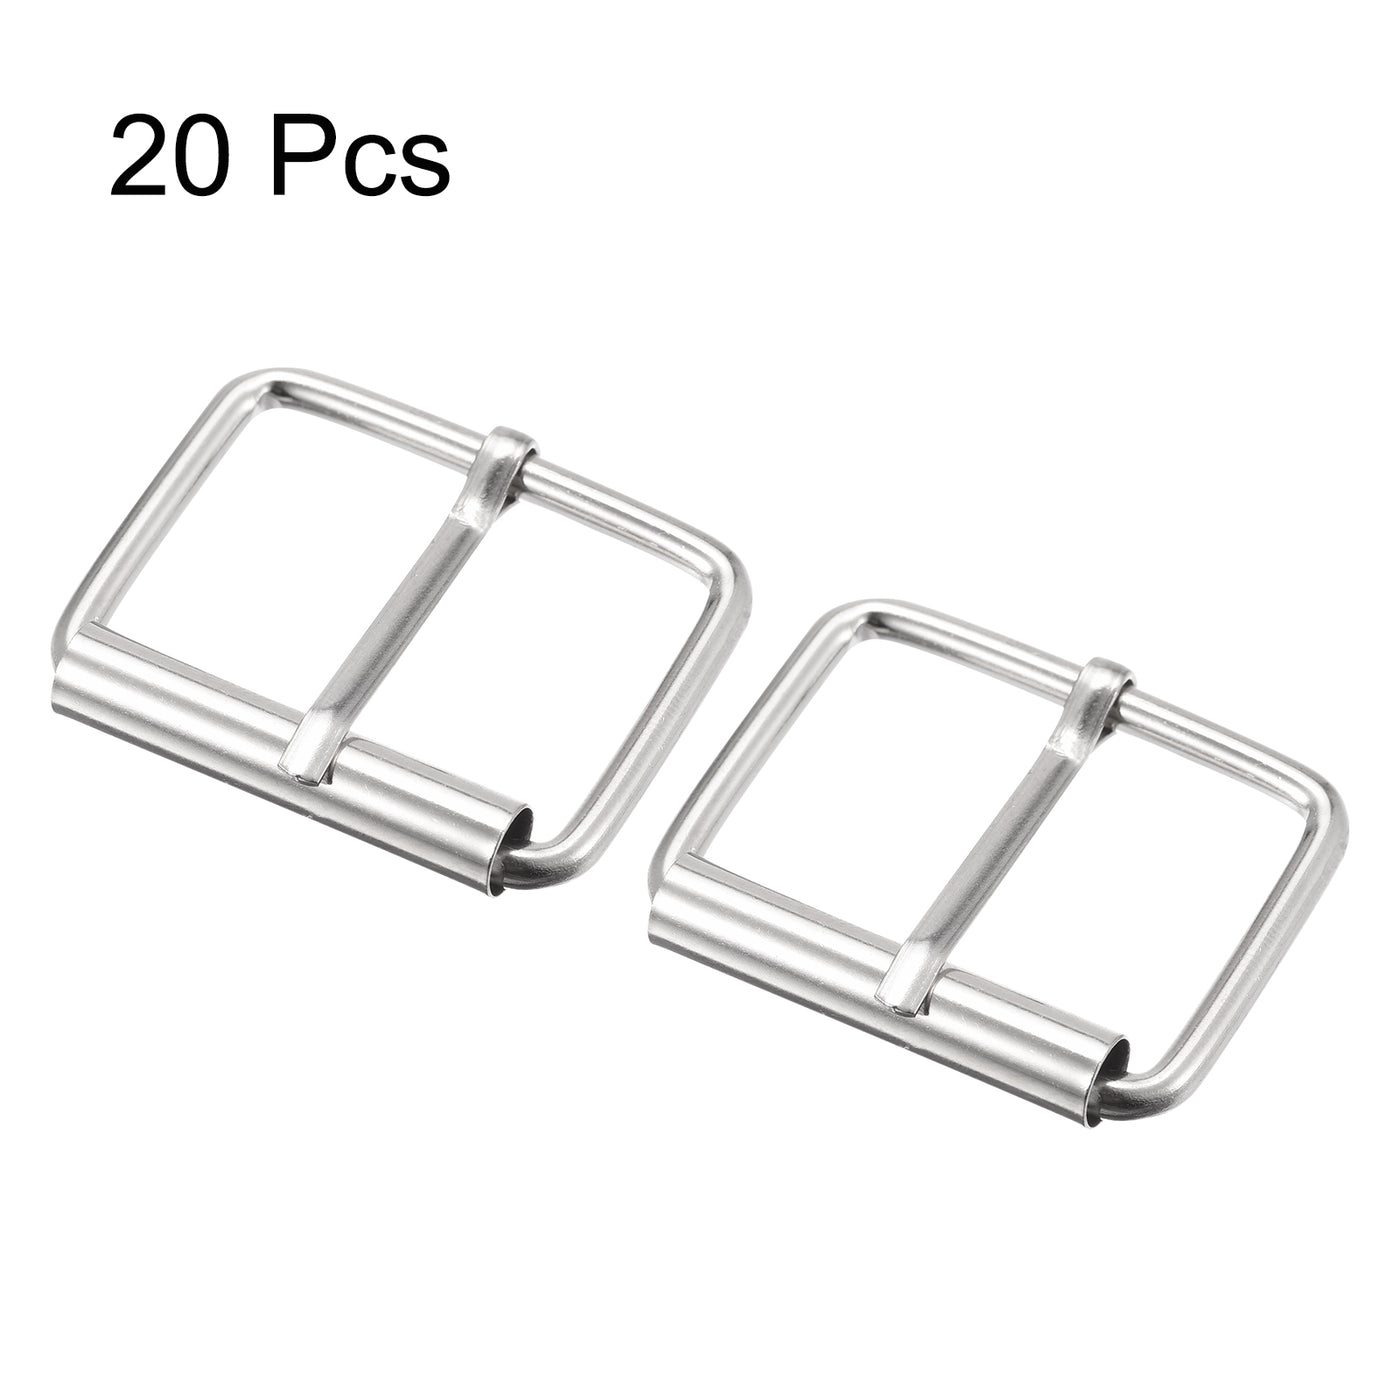 uxcell Uxcell 35mm(1.38") Metal Roller Buckles for Belts Bags Straps DIY Silver Tone 20pcs